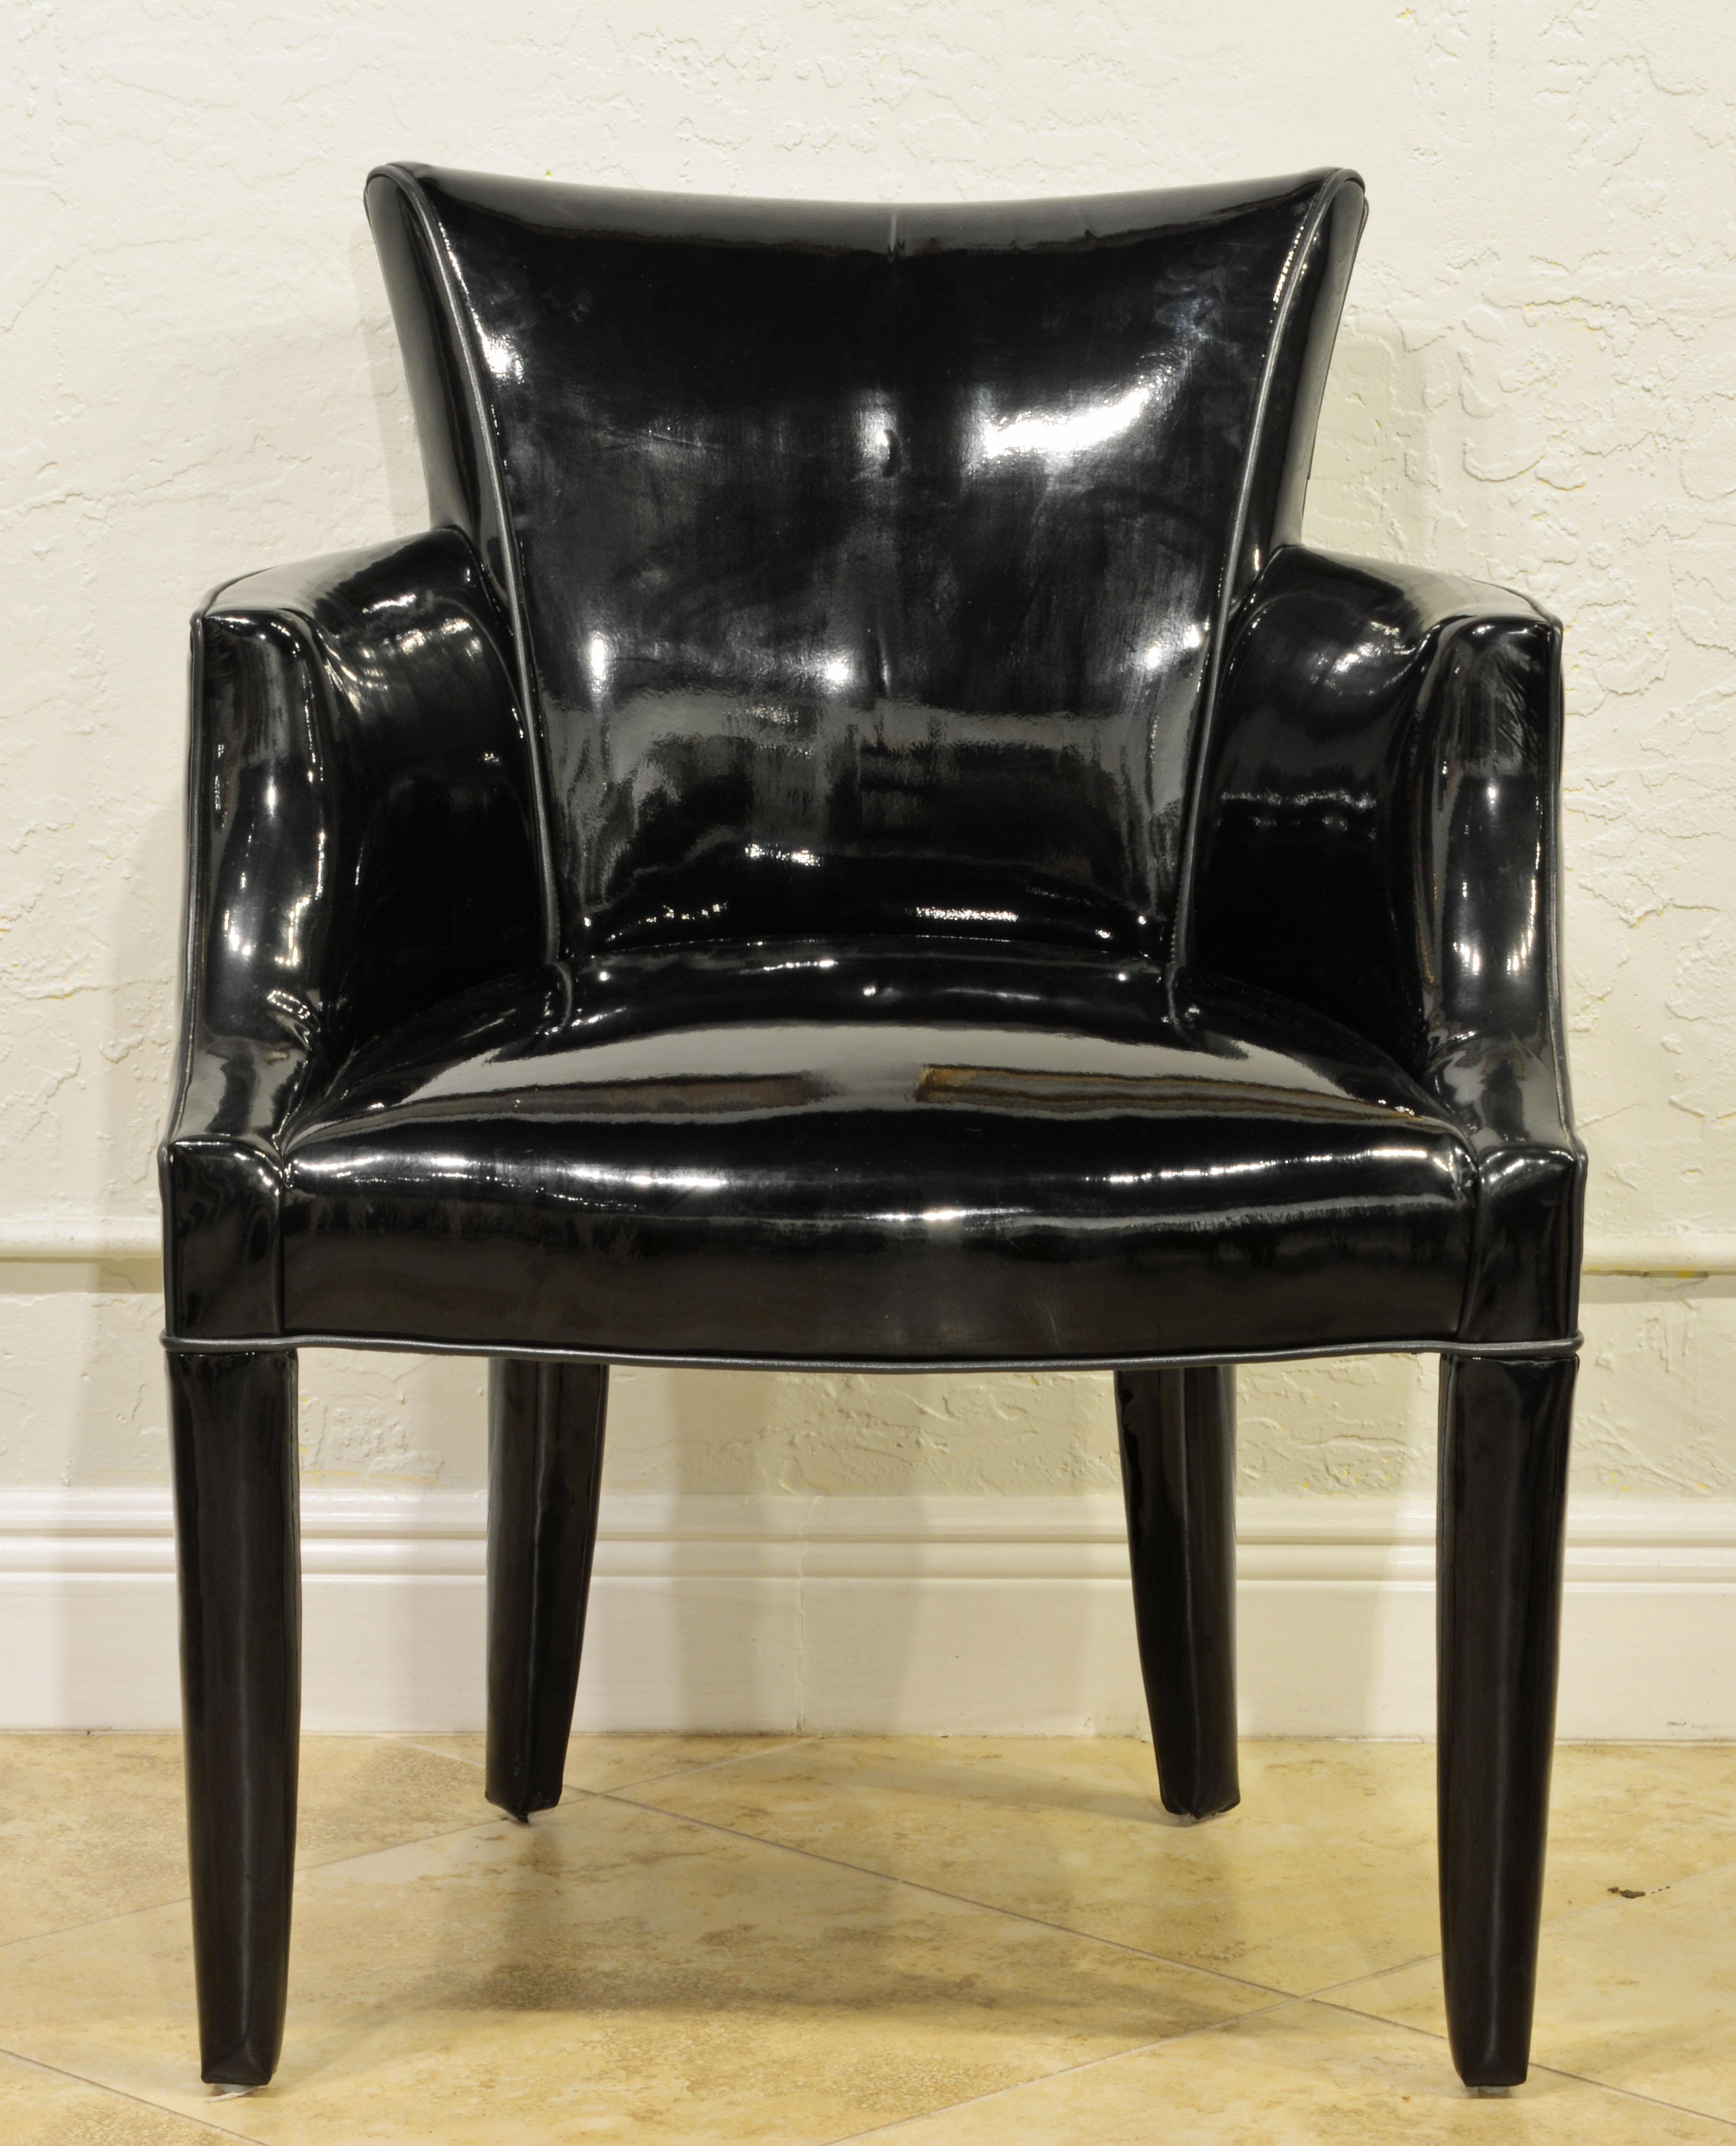 Fully upholstered including the legs in black shiny vinyl these chairs are strikingly modern and chic yet designed in a traditional mode. The chairs are very comfortable and can be used as lounge chairs as well as dining chairs.